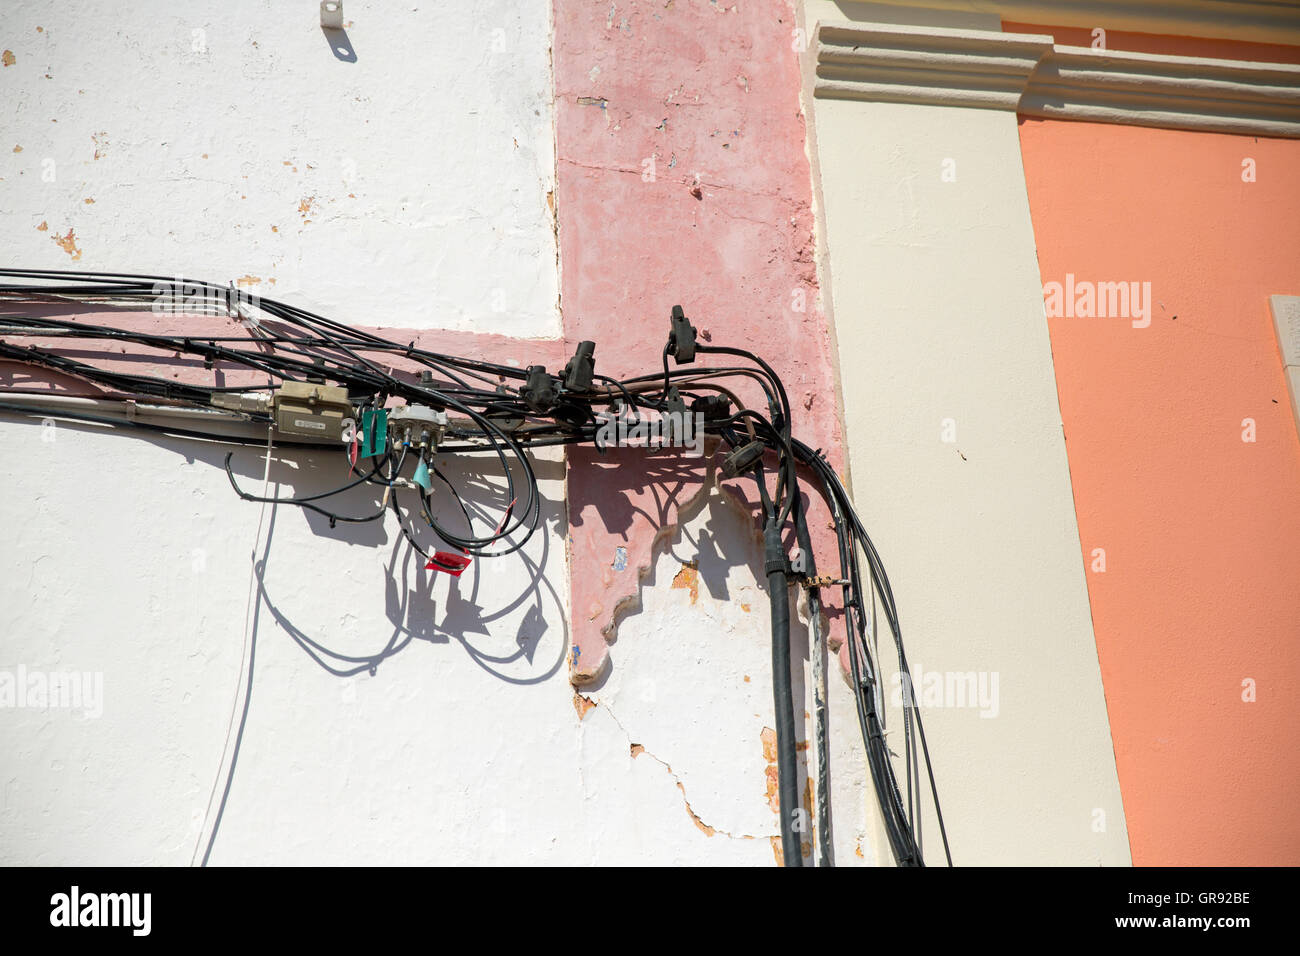 Wiring And Electrical Service Connections In Portugal On A House Wall Stock Photo Alamy